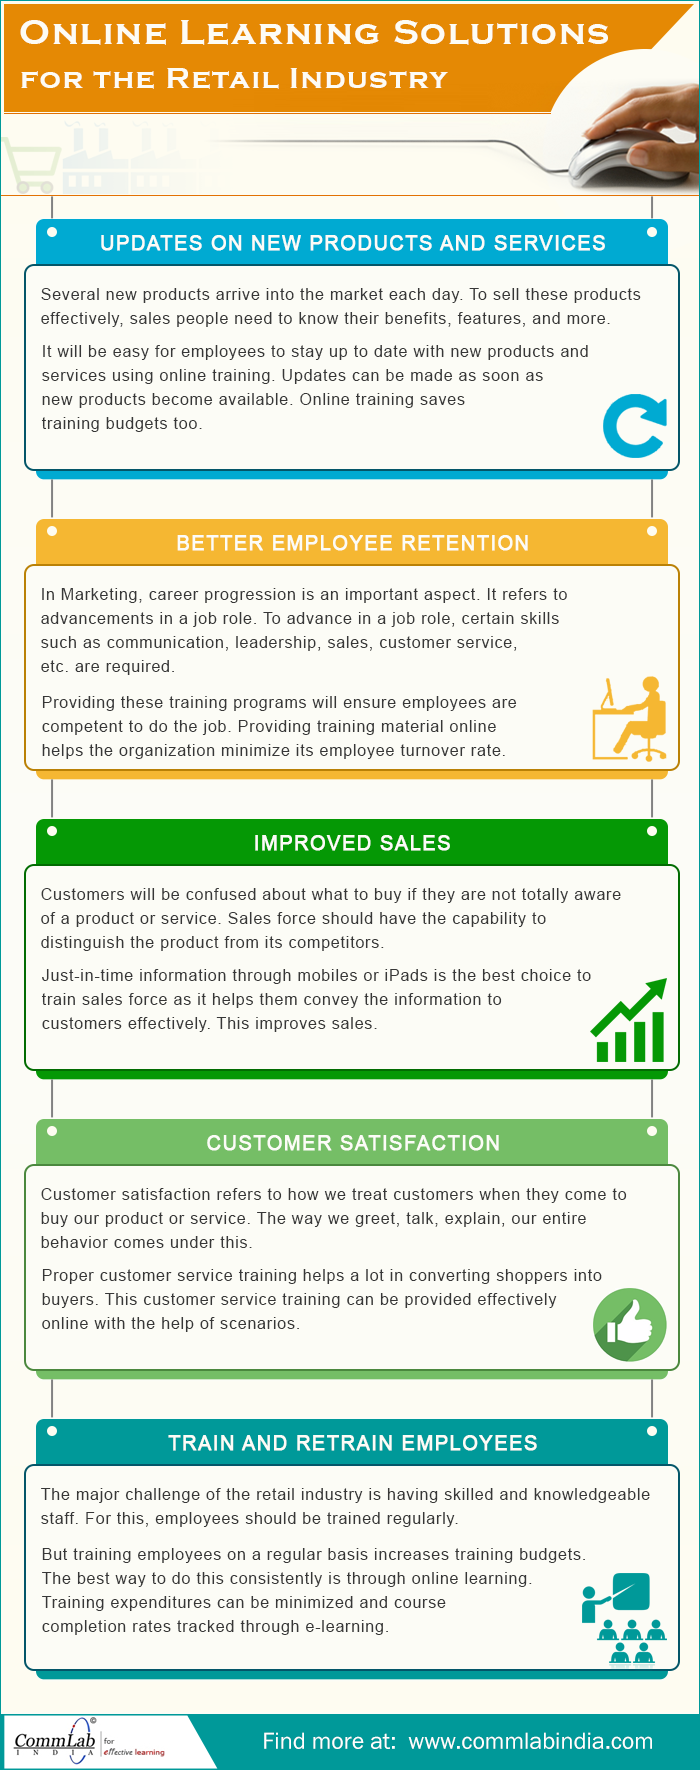 Online Learning Solutions for The Retail Industry [Infographic]